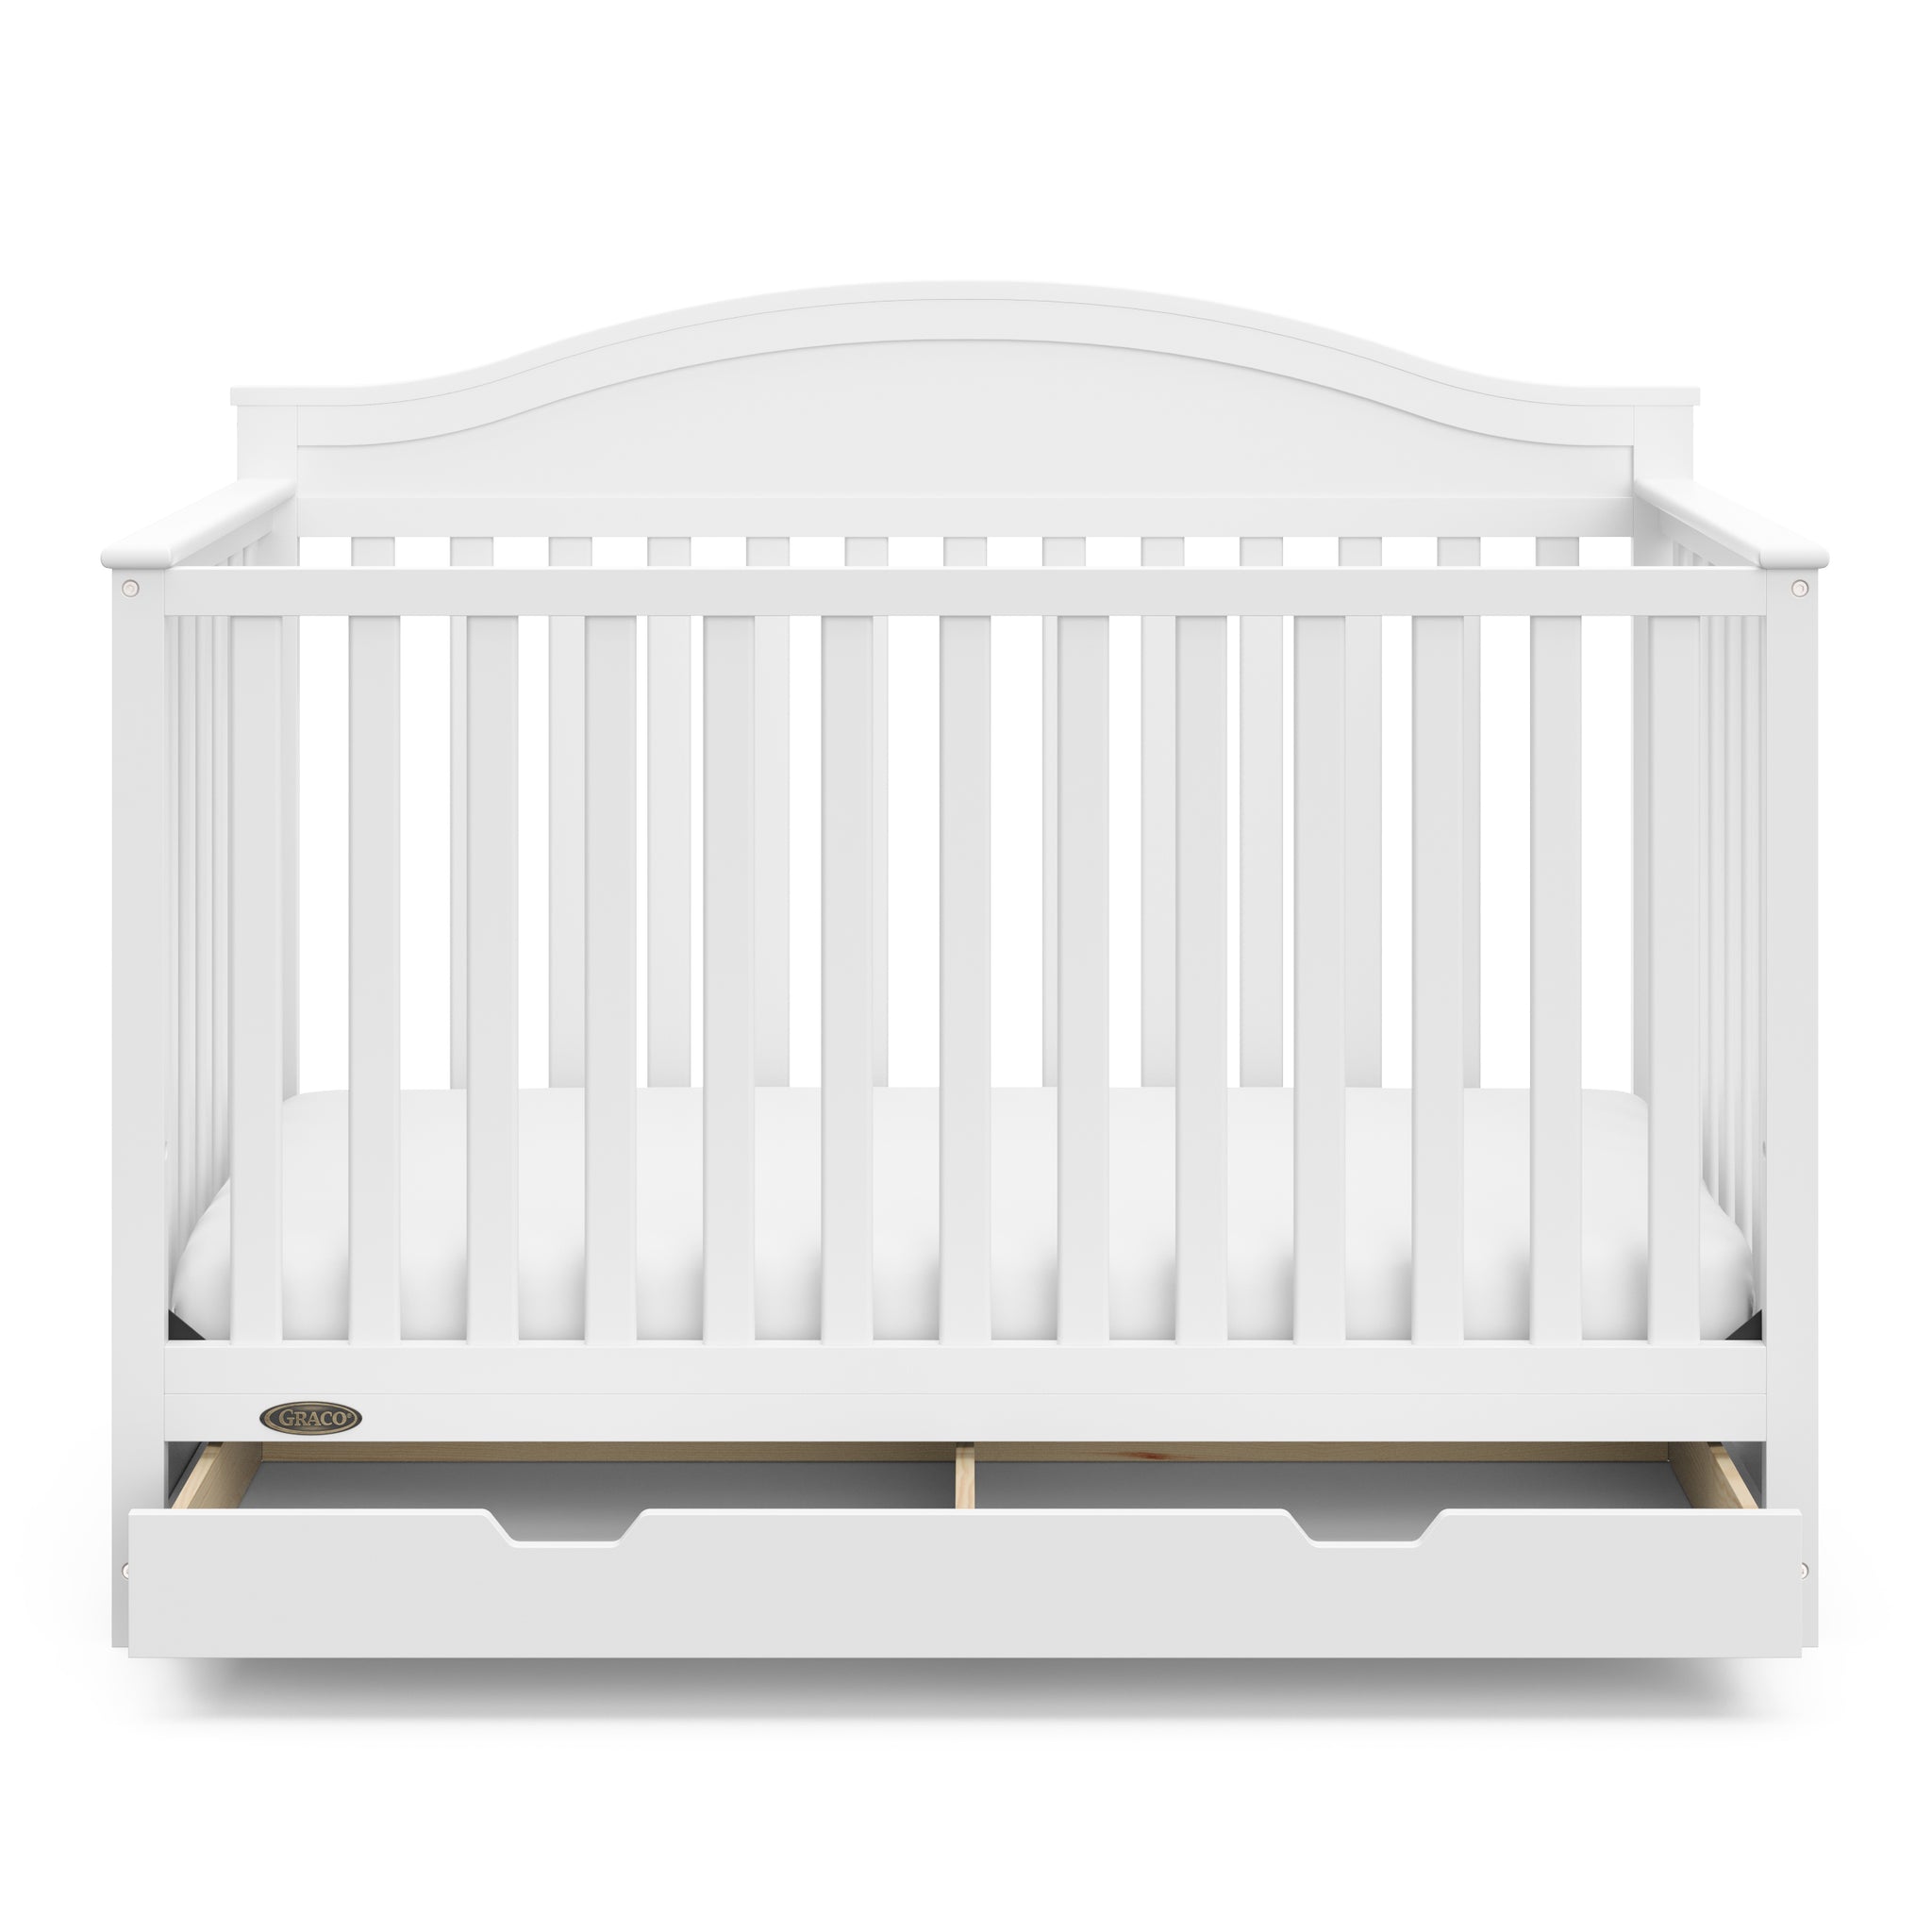 Front view of white crib with open drawer